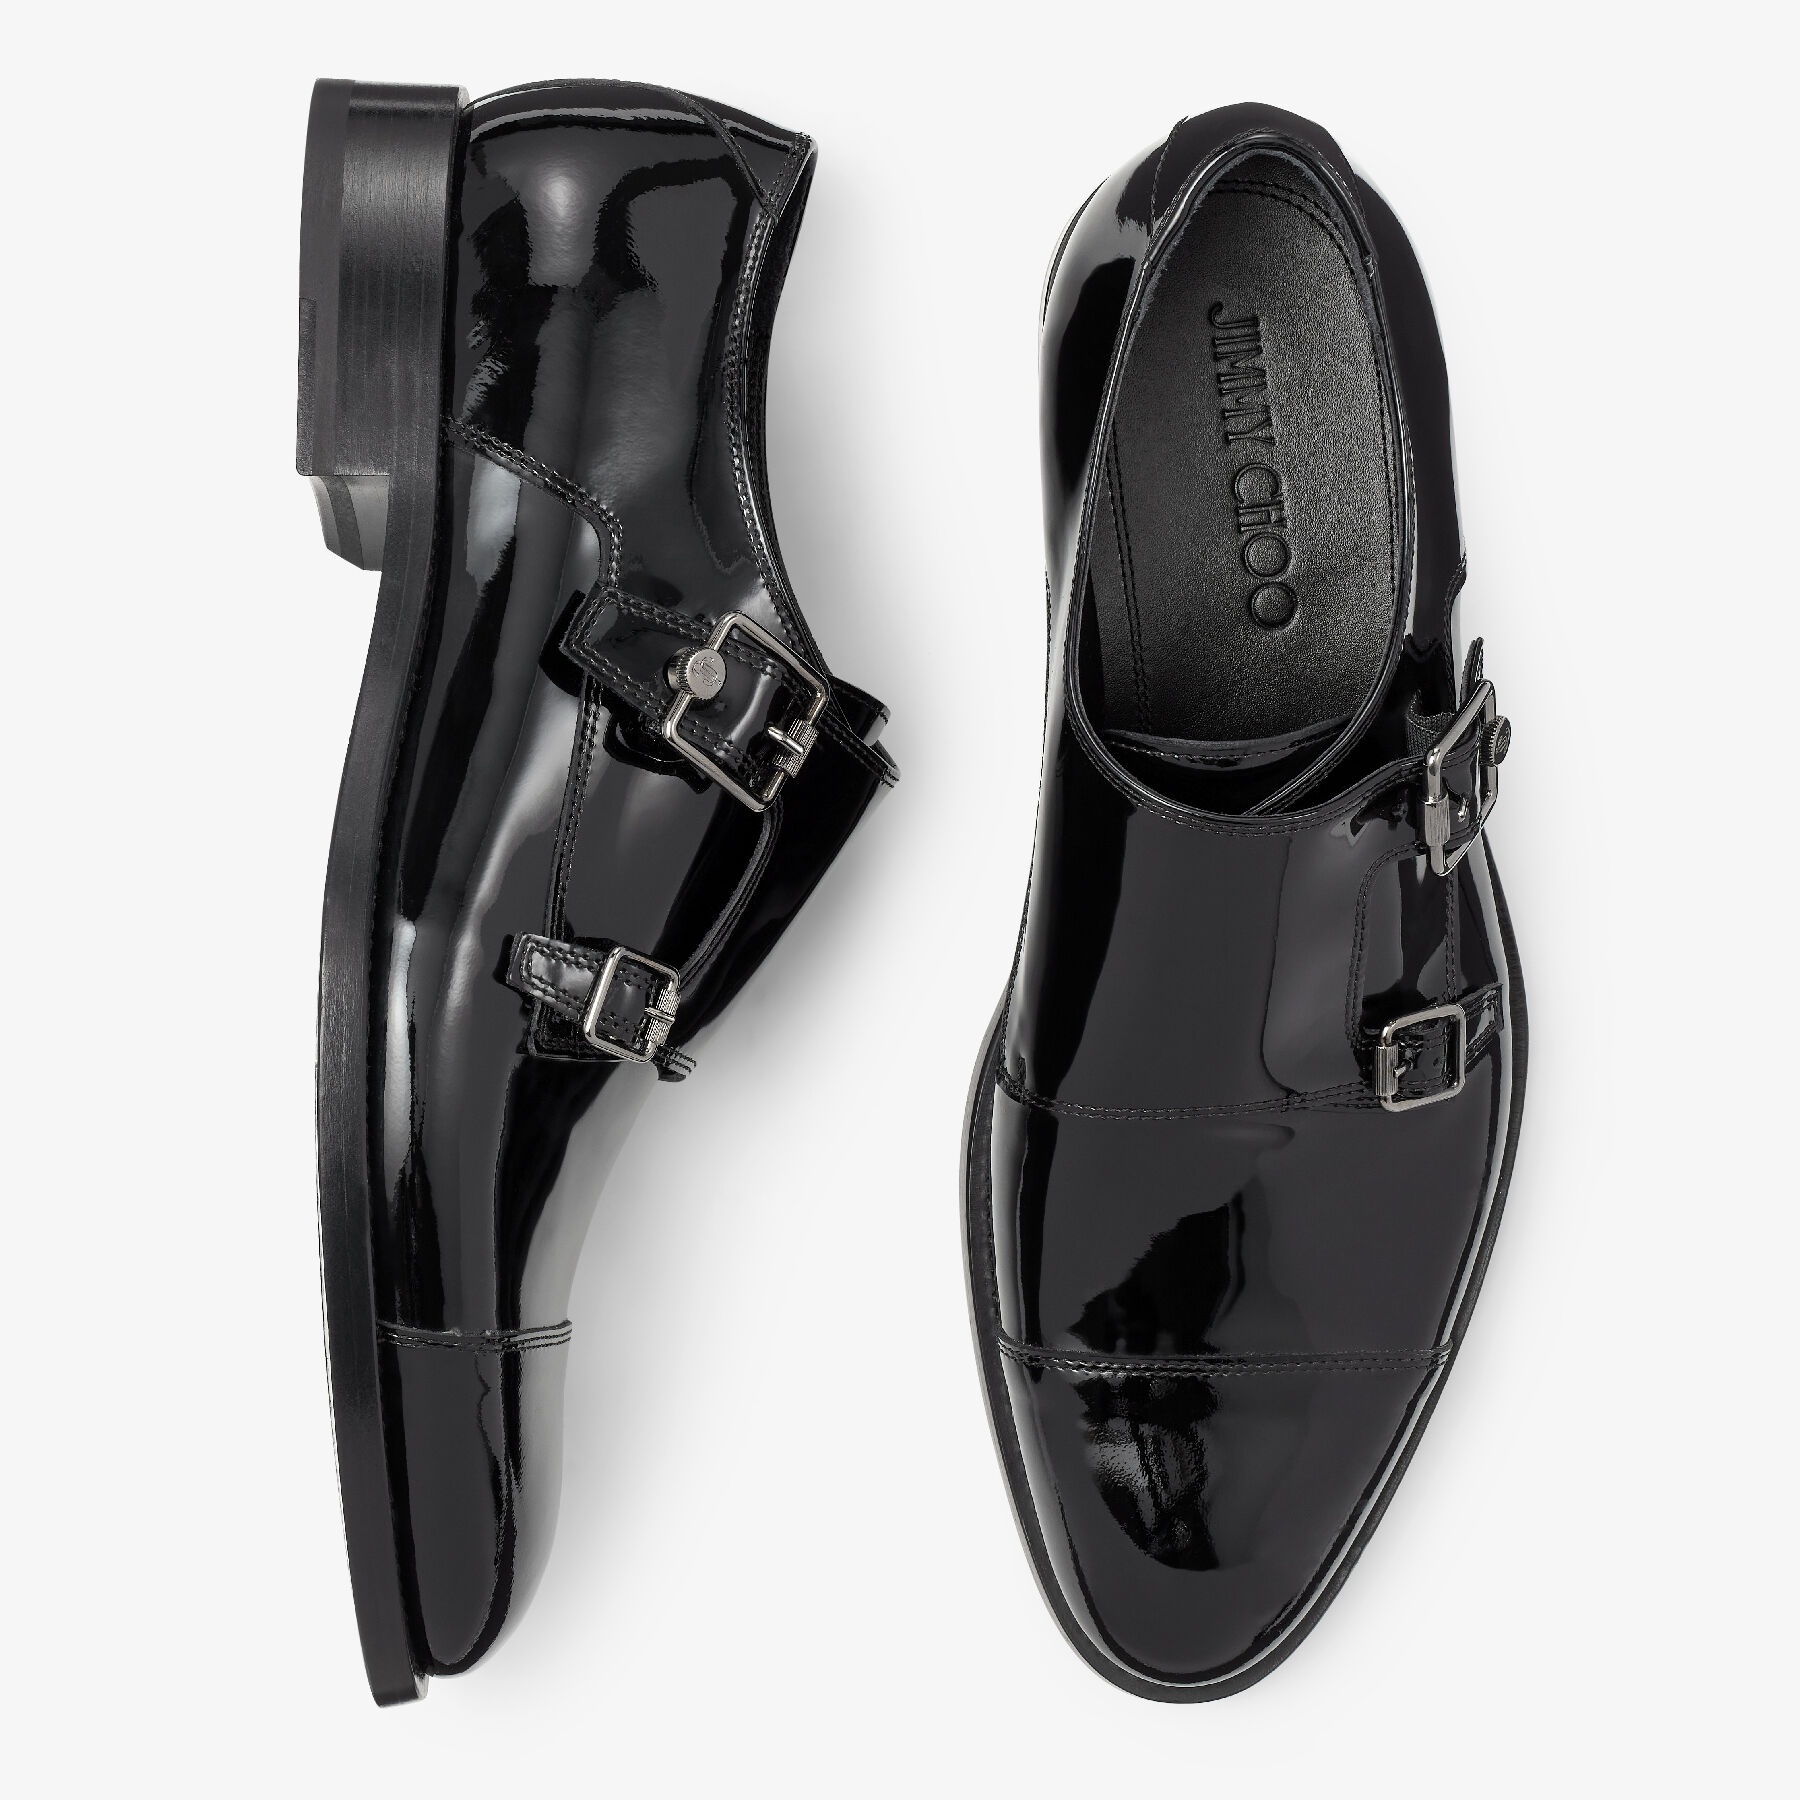 Finnion Monkstrap
Black Patent Leather Monk Strap Shoes with Studs - 4